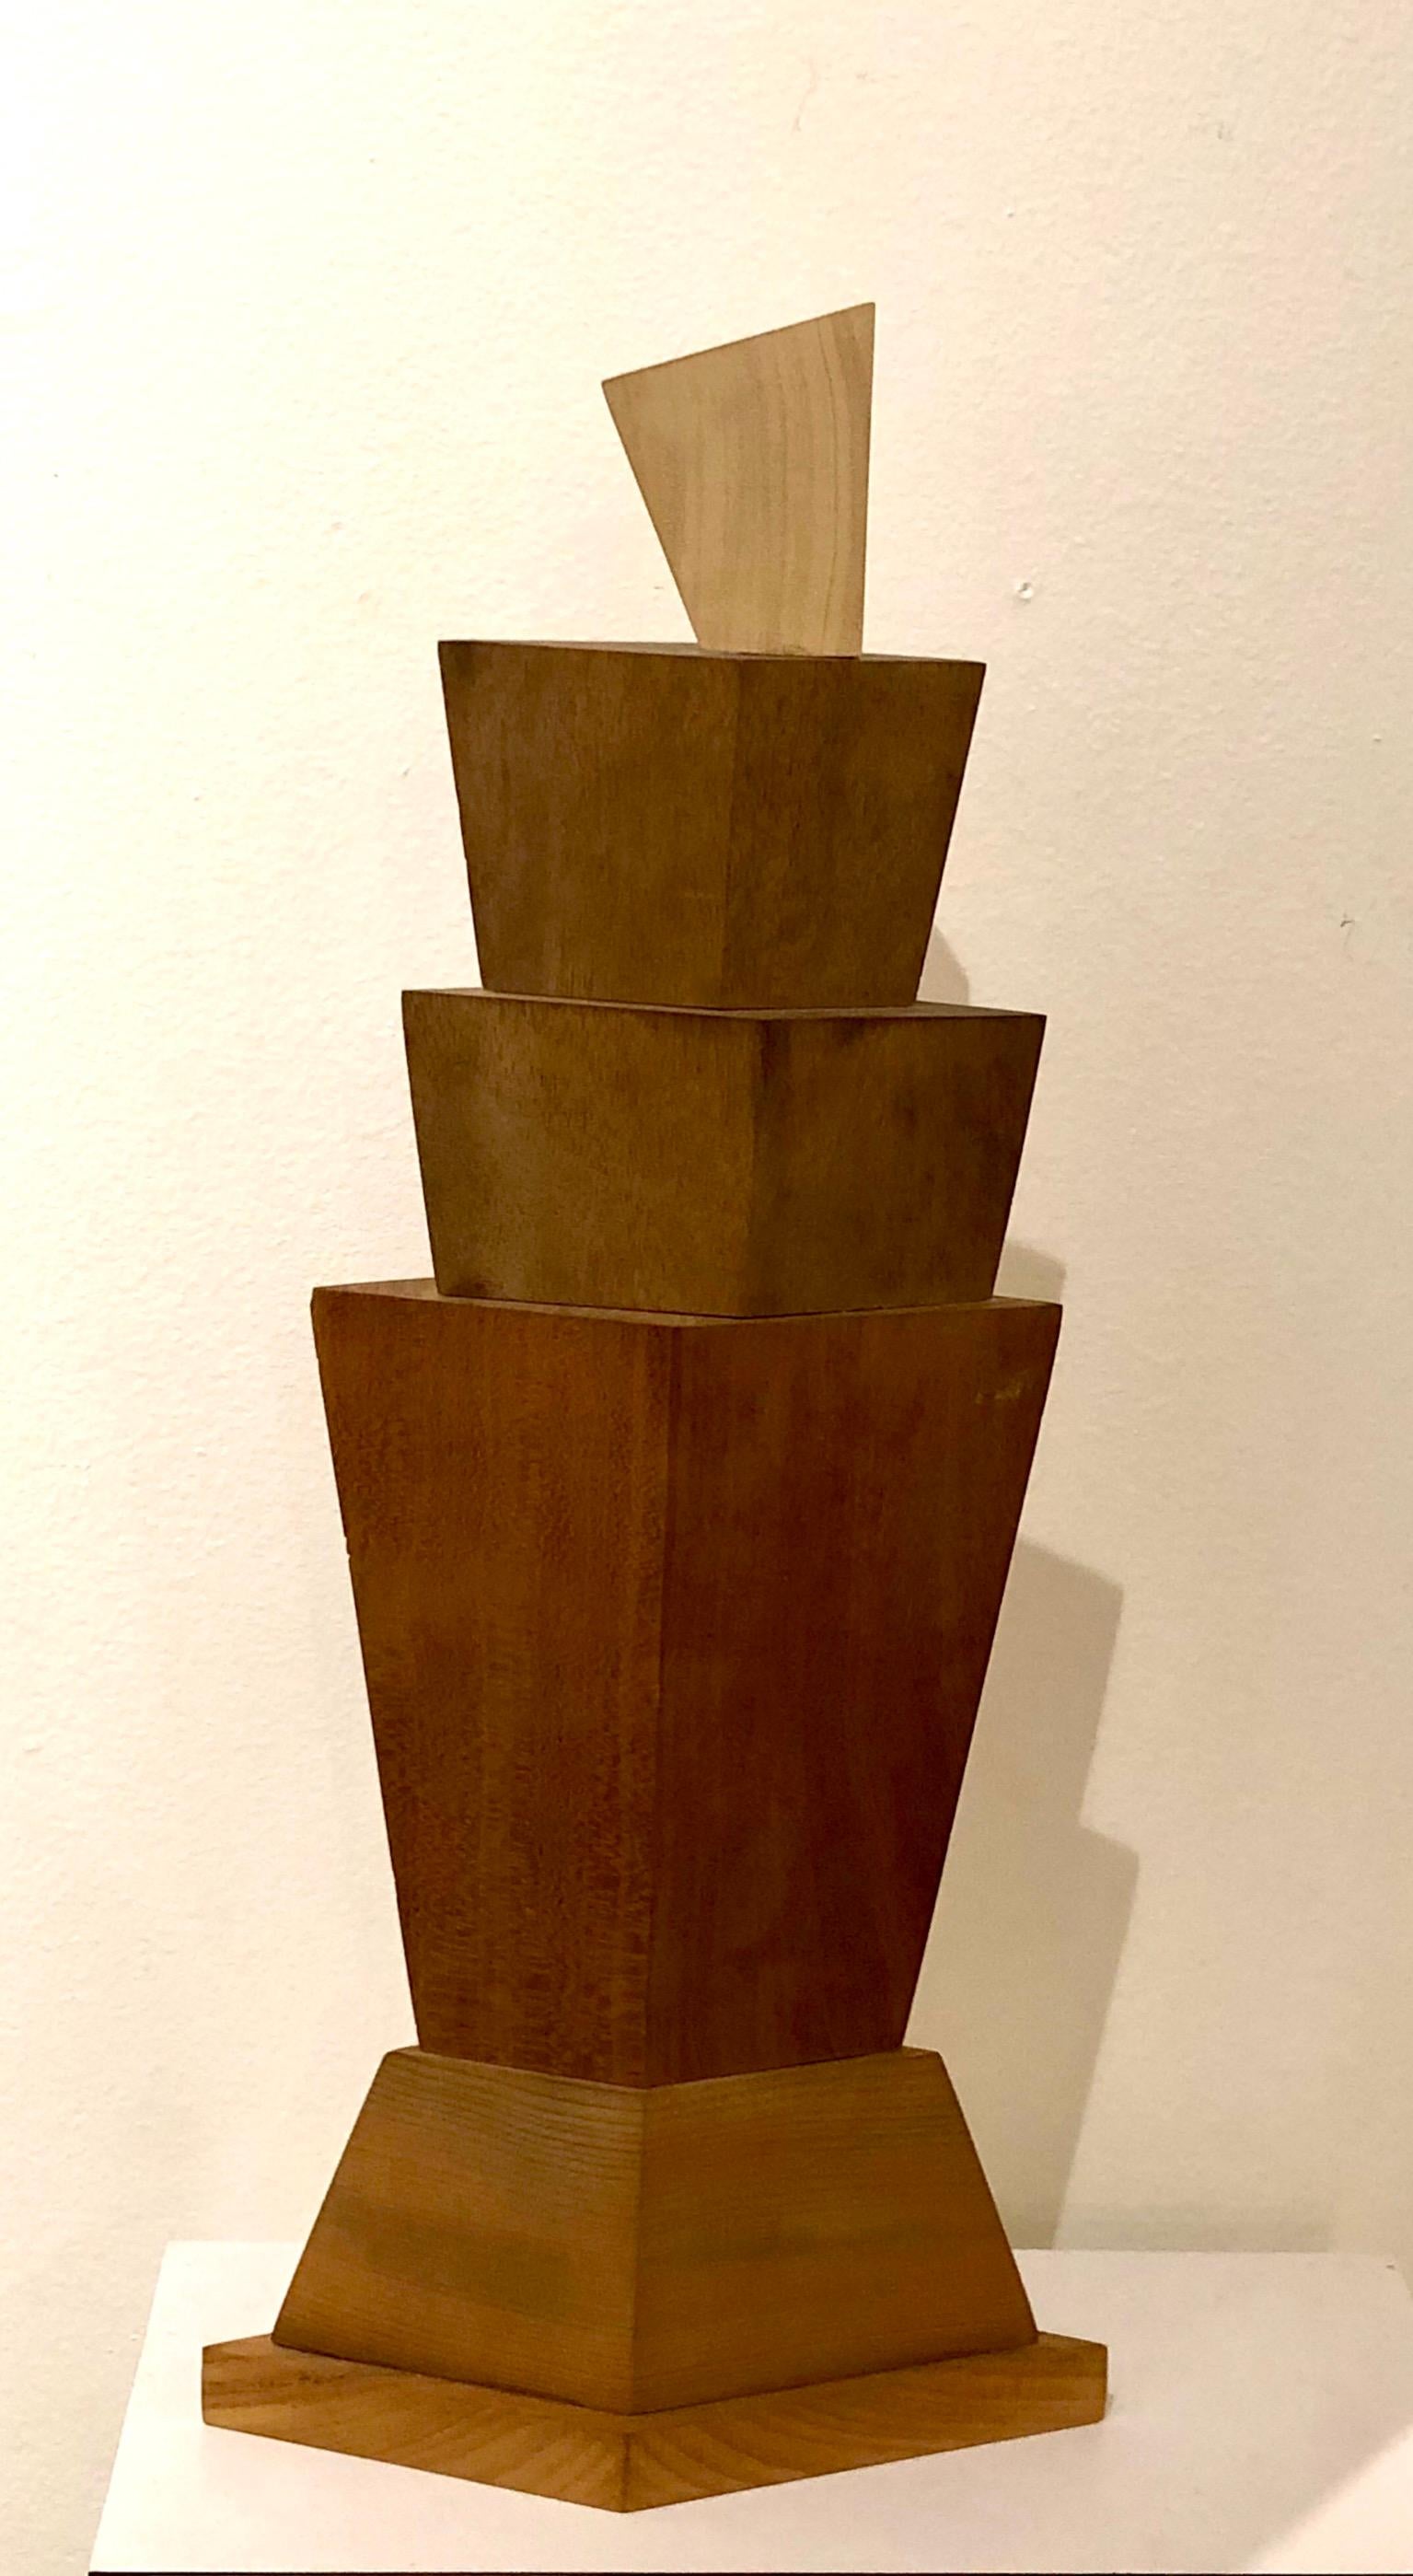 American Postmodern Abstract Sculpture by La Jolla Artist John Rogers Signed/Dated 2003 For Sale